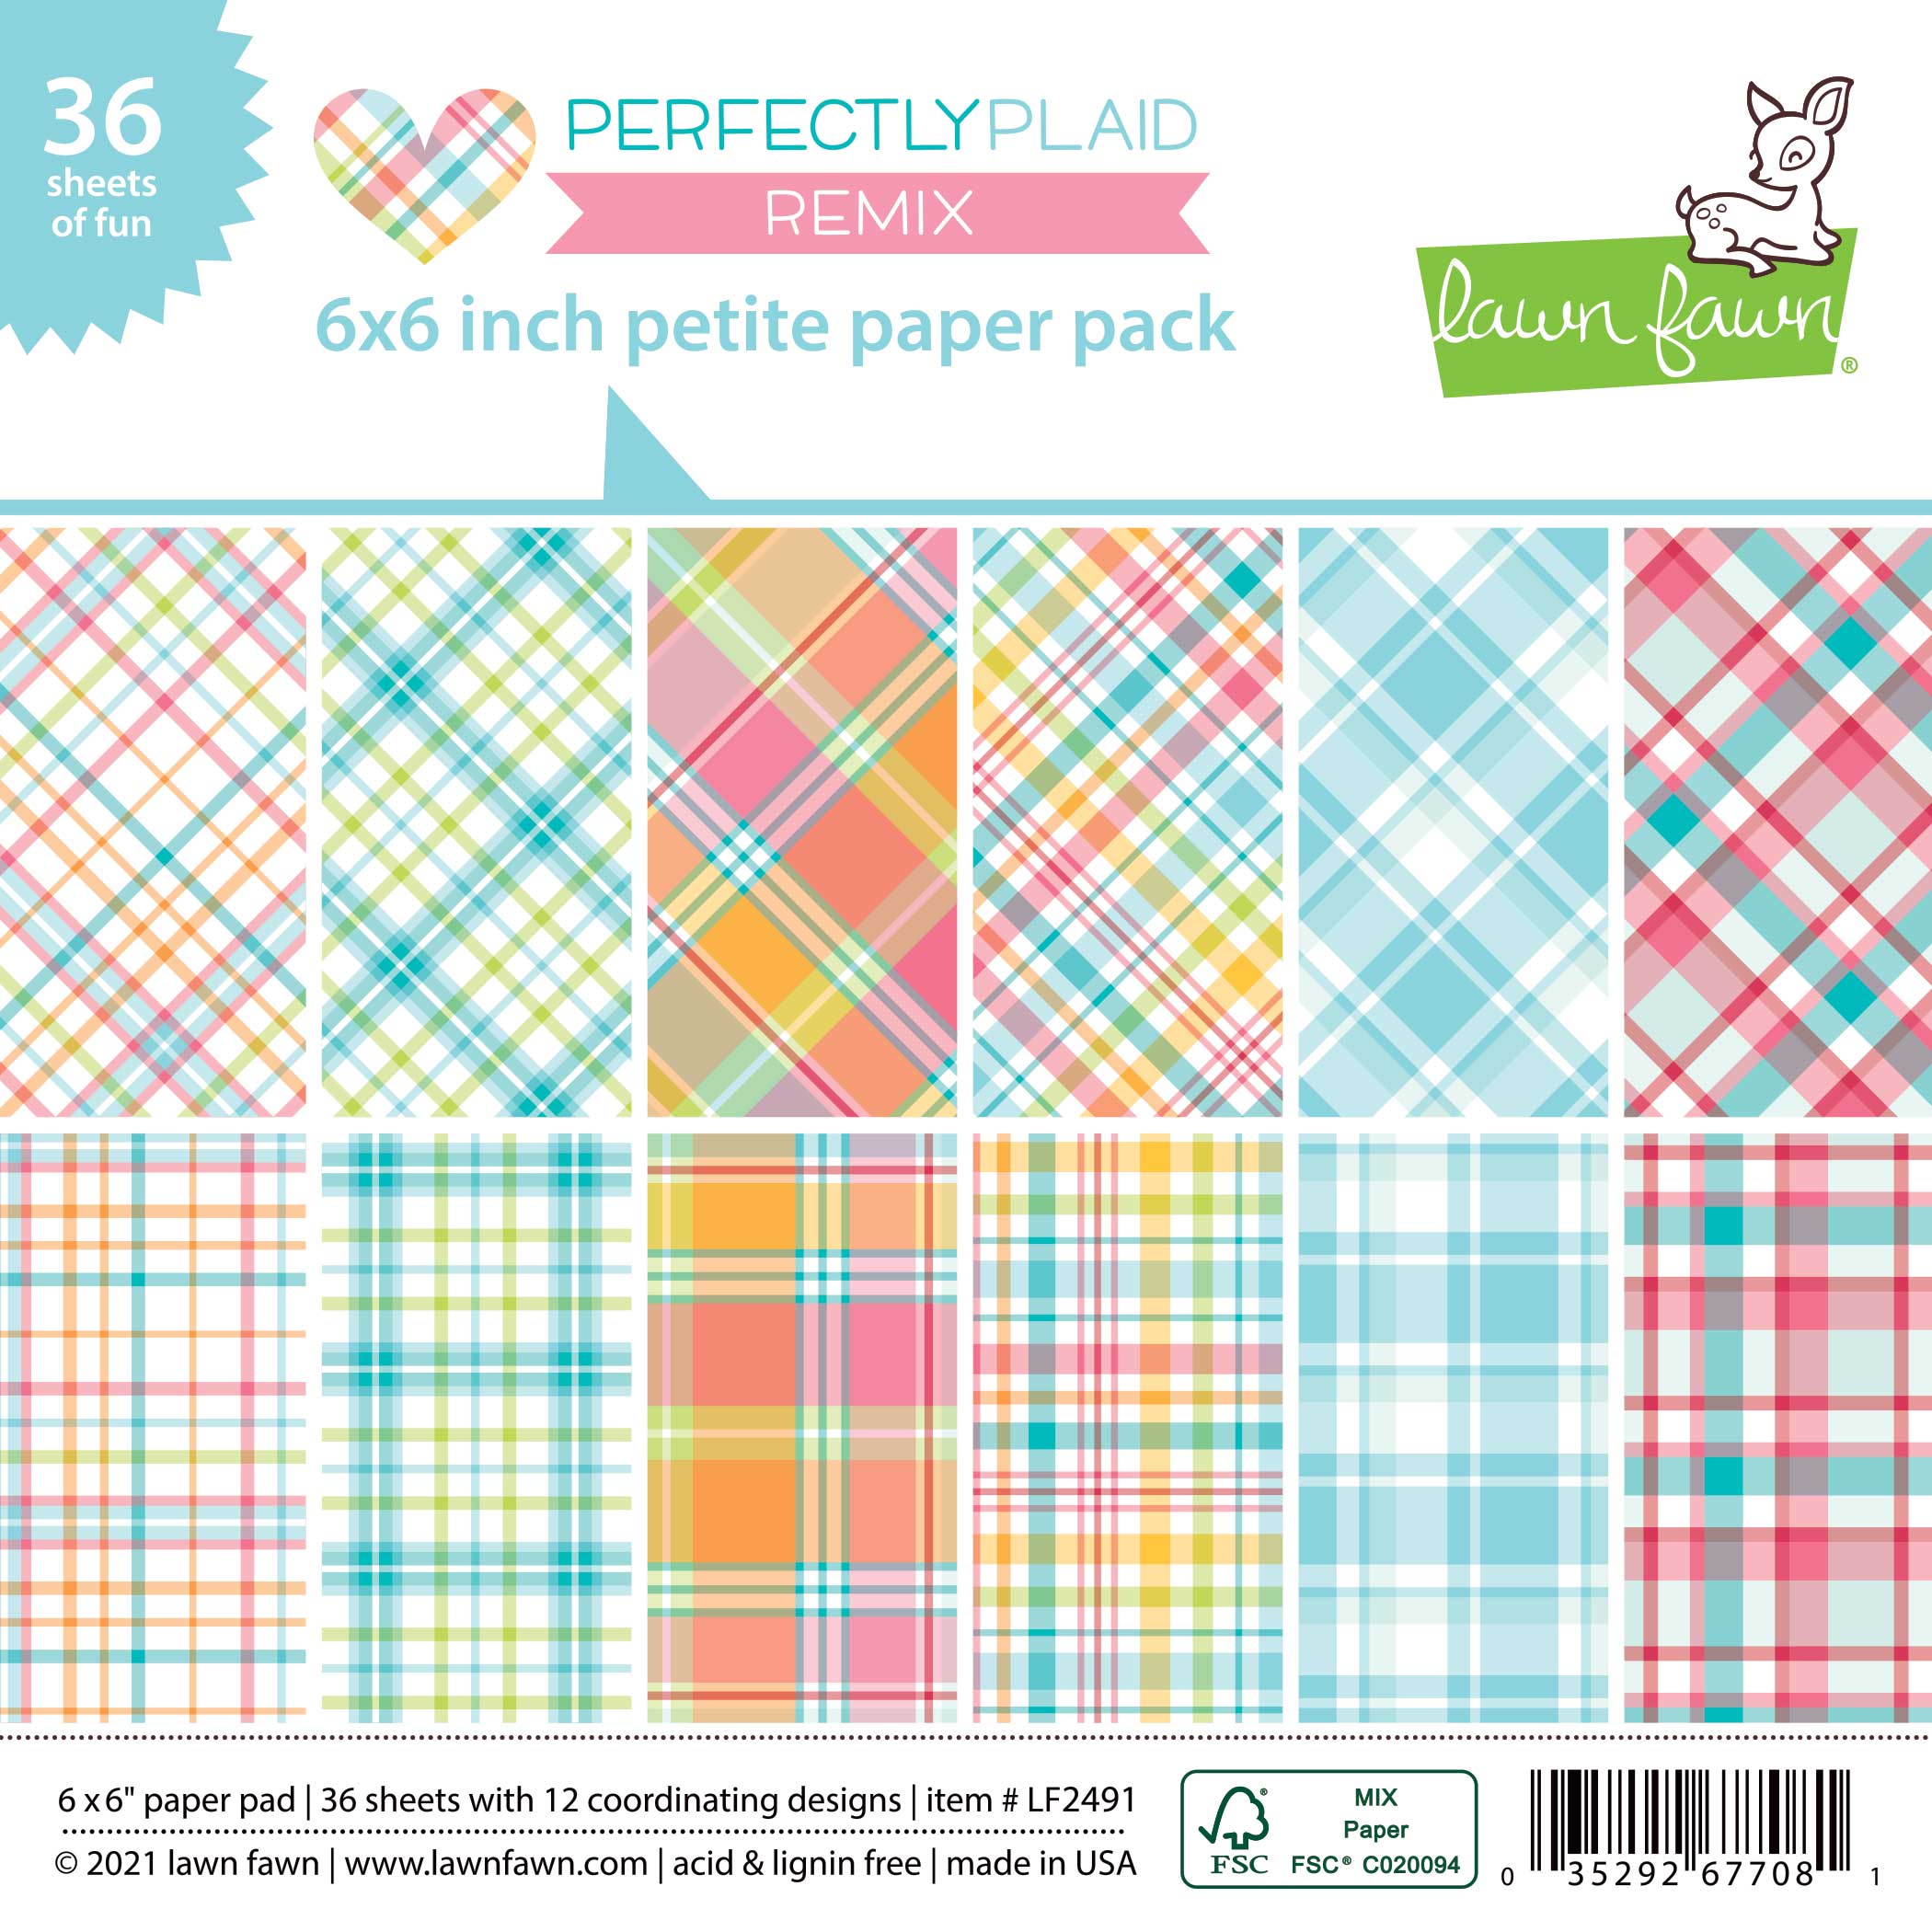 Perfectly Plaid Remix Petite Paper Pack